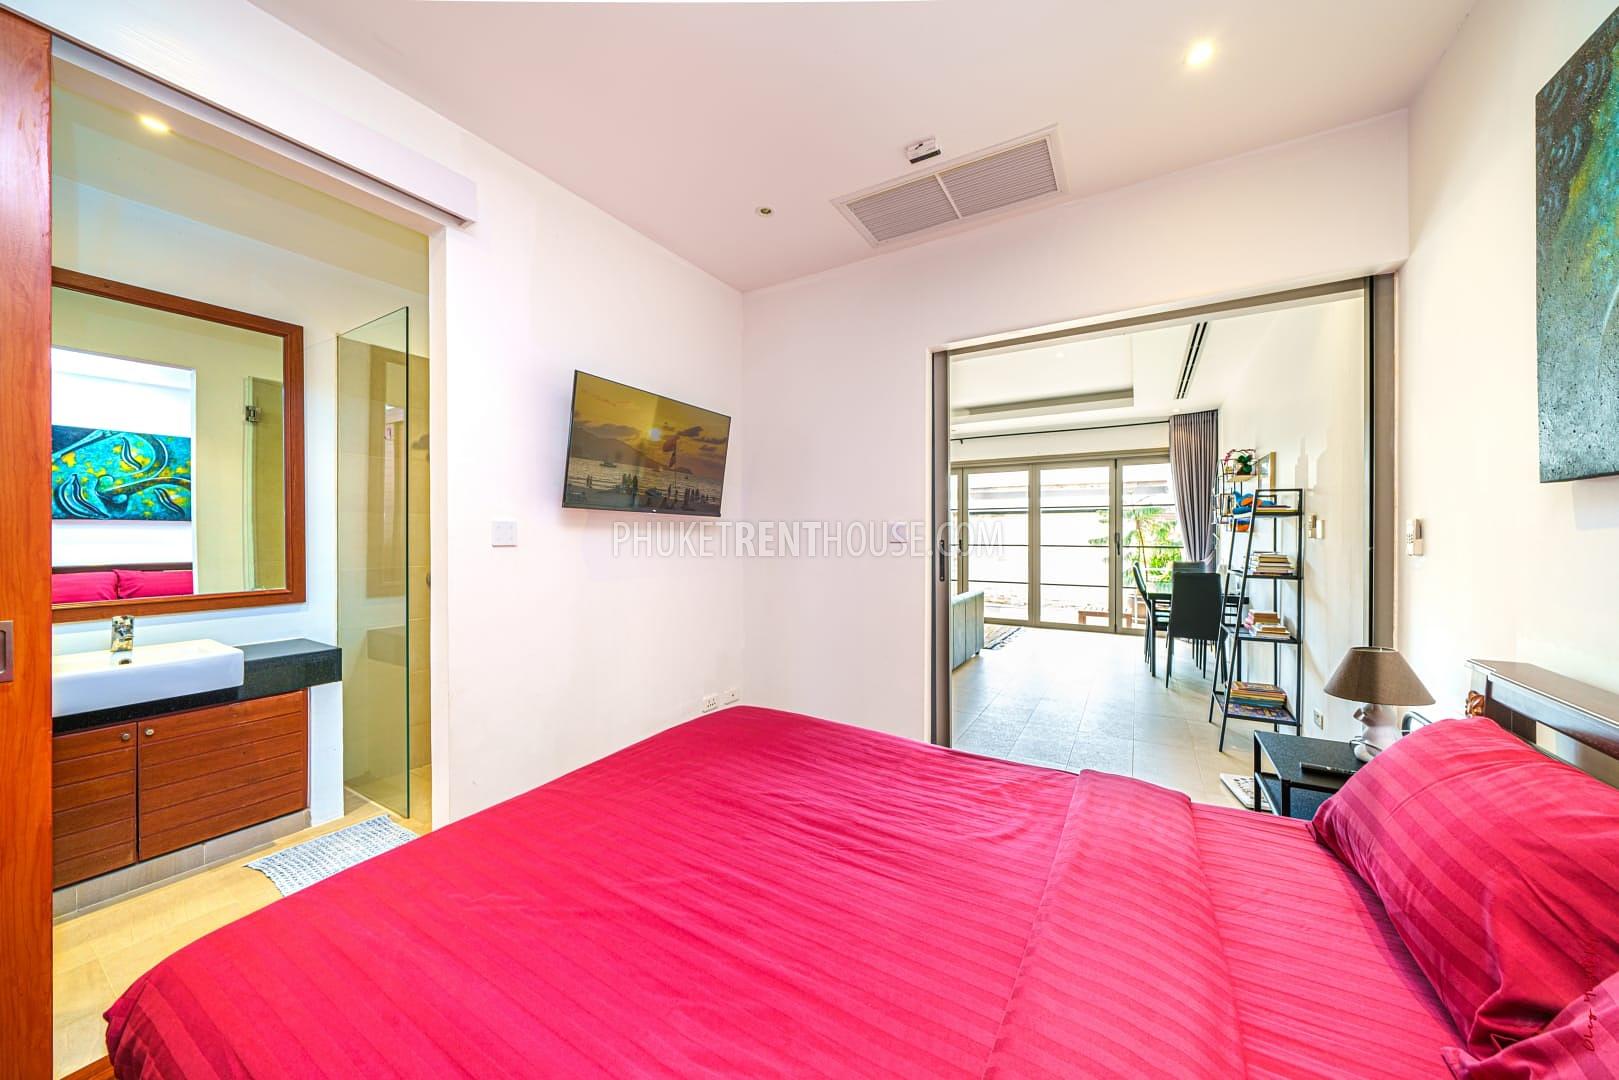 BAN21764: One bedroom villa with private pool on Bangtao beach. Photo #18